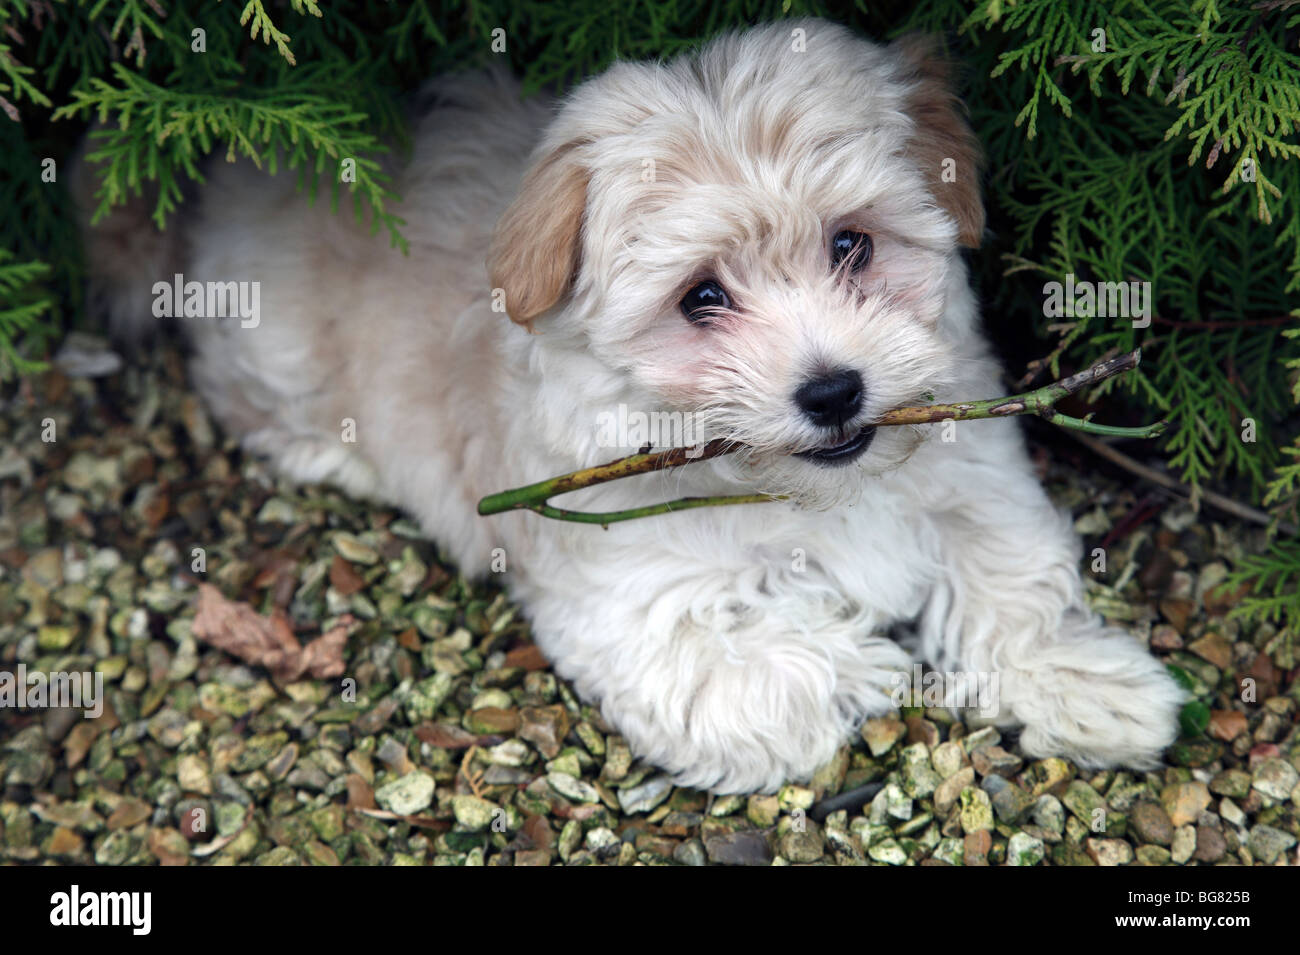 Abbie, a pedigree Havanese puppy at 7 weeks of age Stock Photo